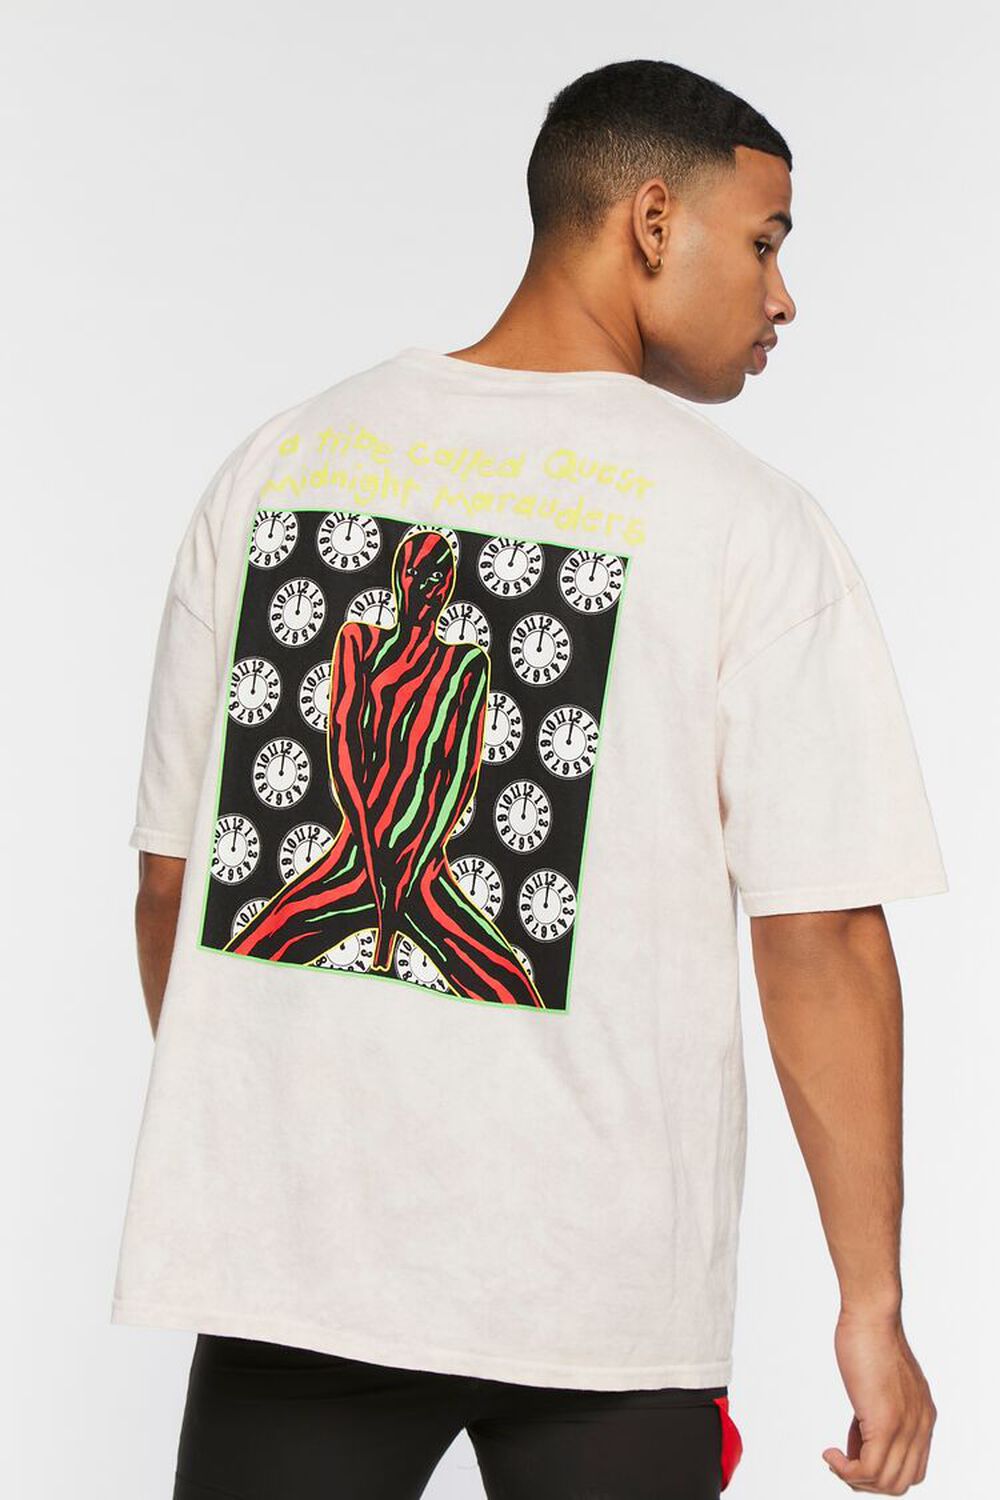 TAUPE/MULTI A Tribe Called Quest Graphic Tee, image 3